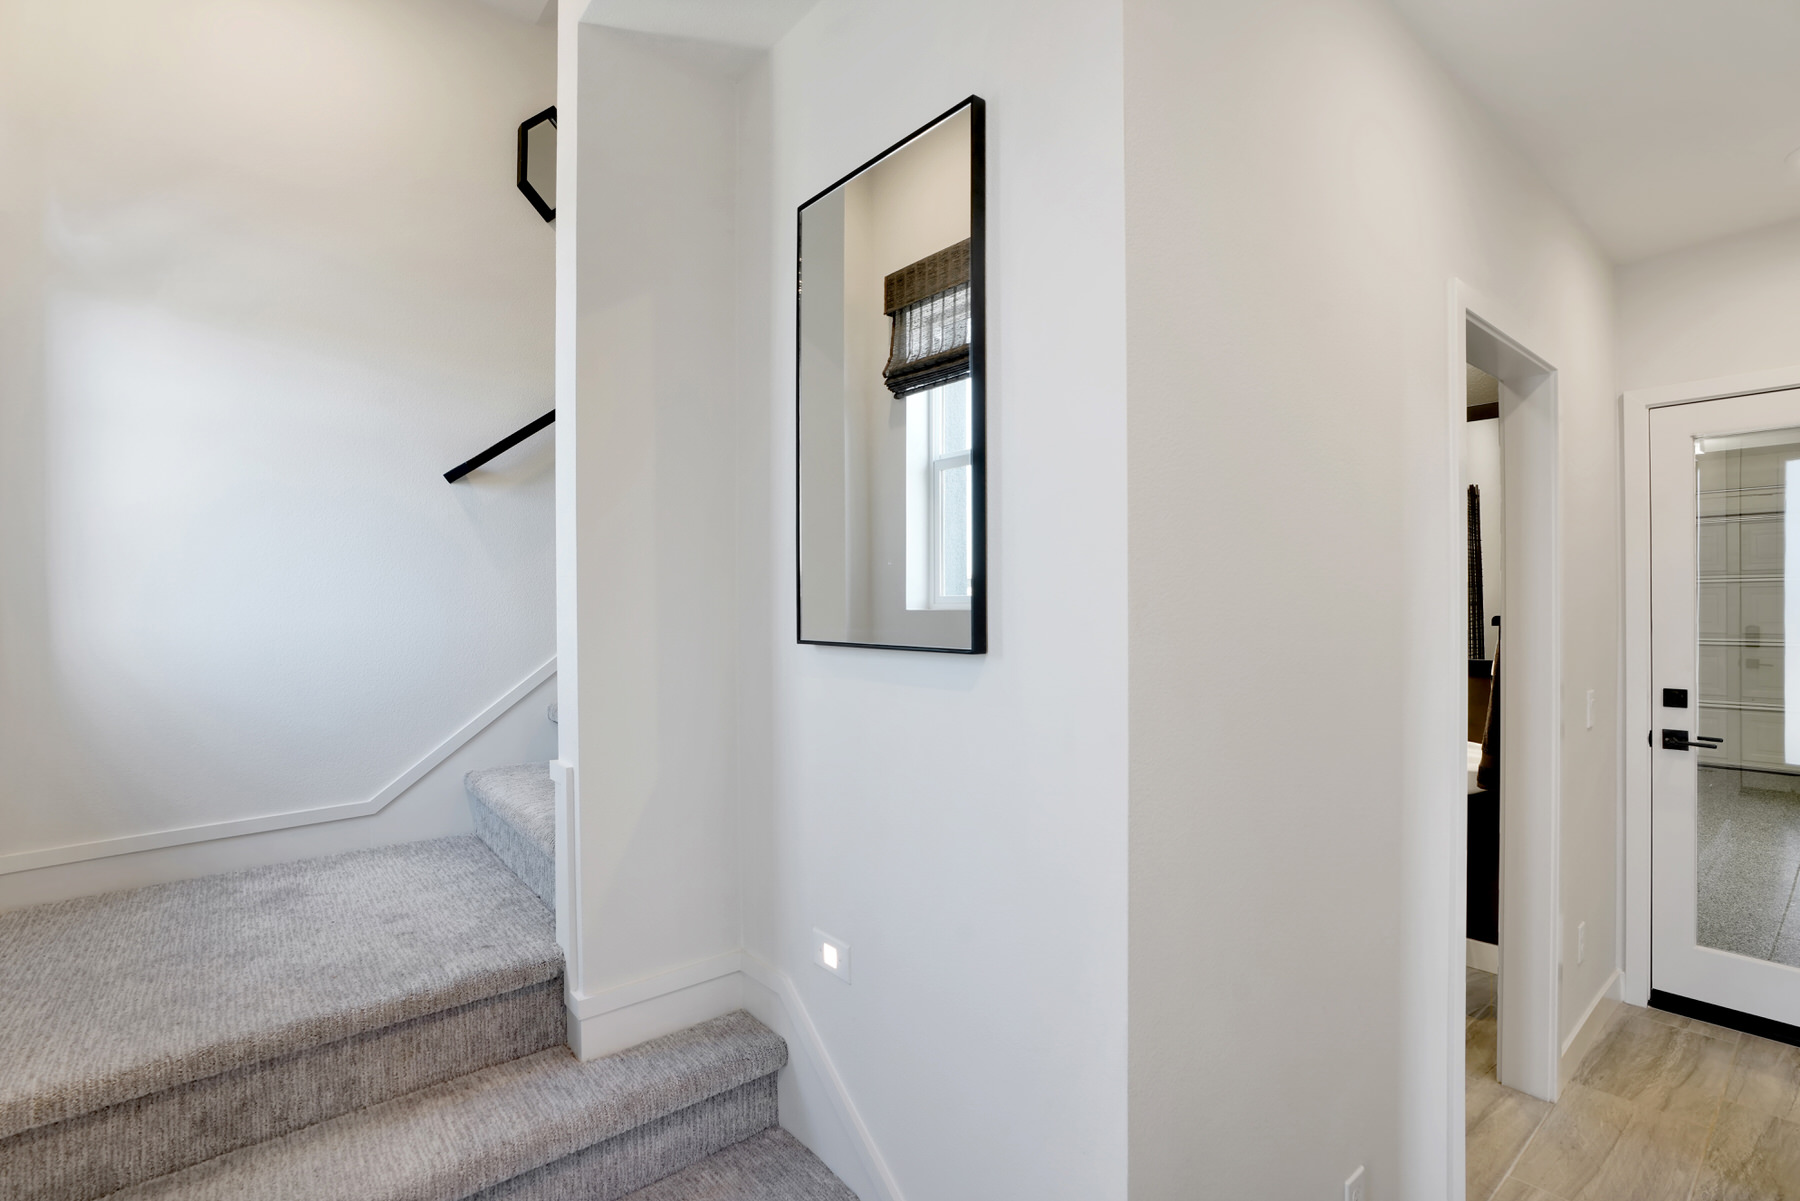 Stairs/Entry in Plan 3 at Moneta Pointe by Melia Homes in Gardena, CA